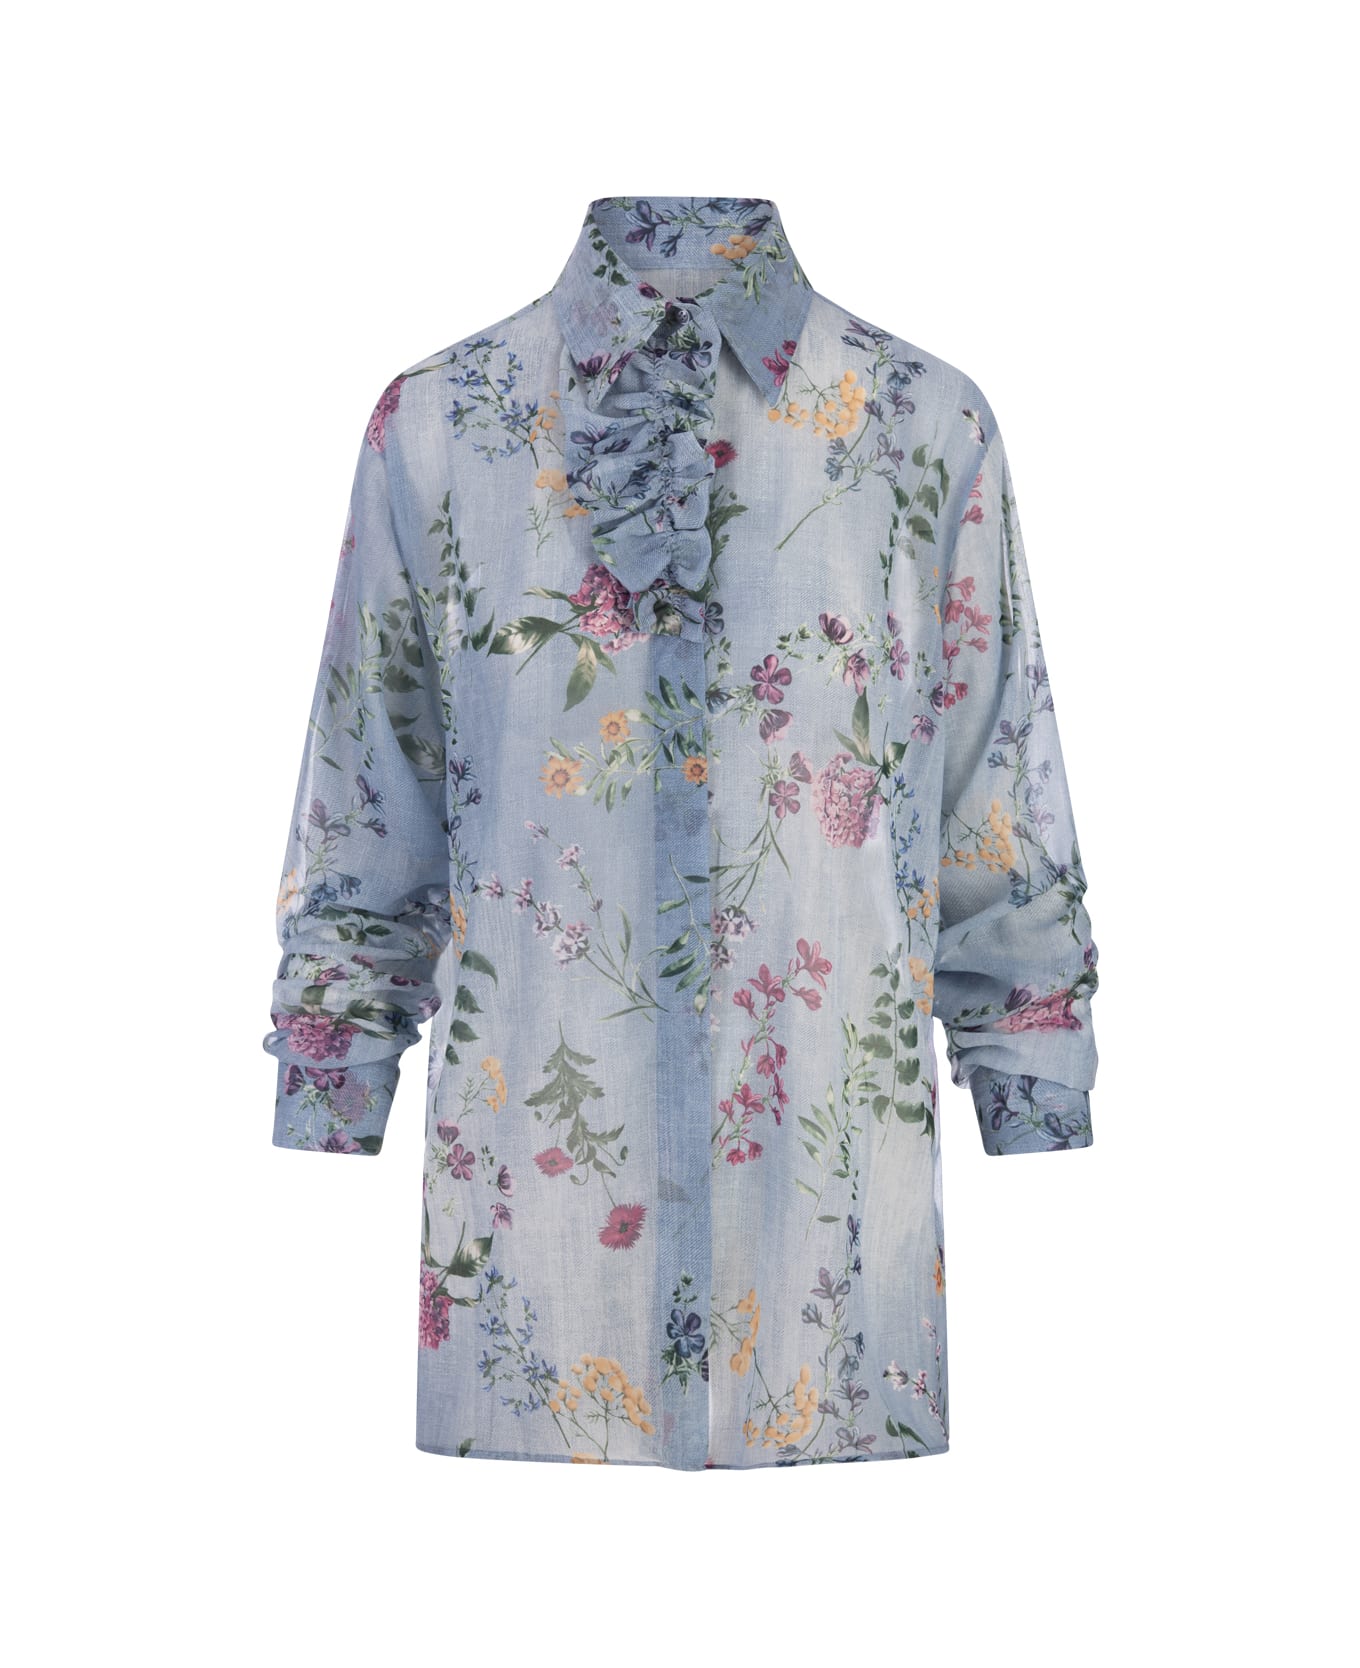 Ermanno Scervino Soft Shirt With Floral Print - Blue シャツ